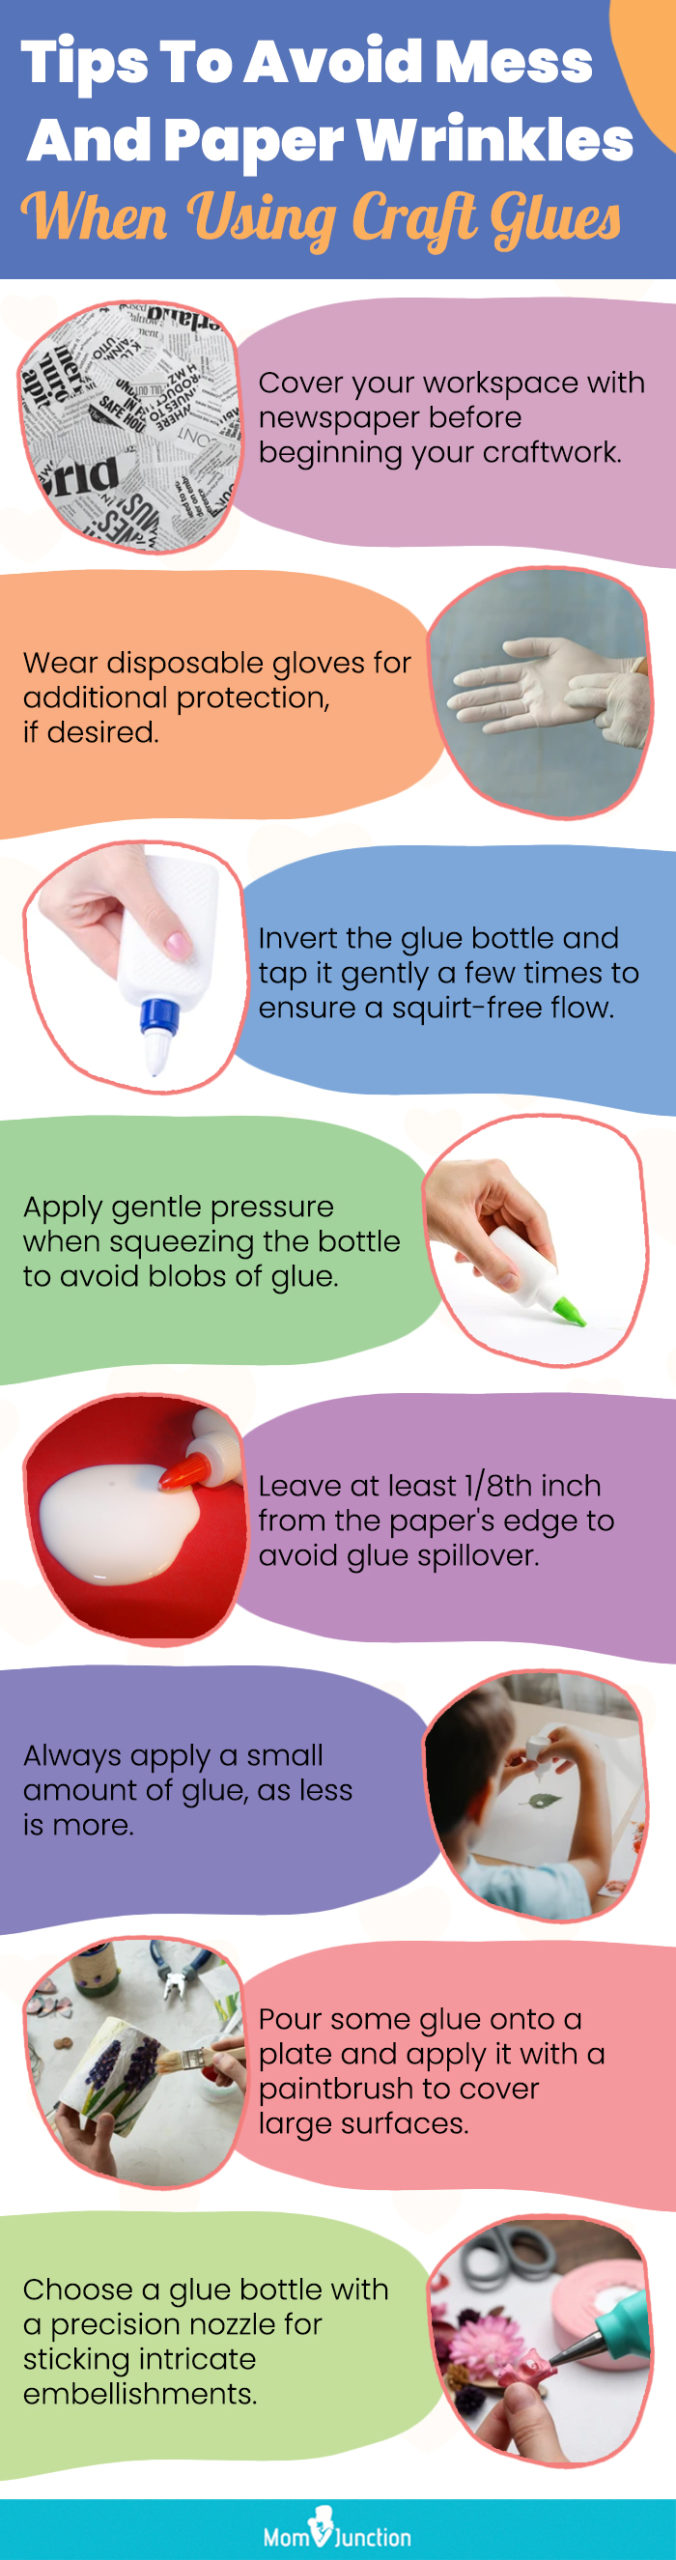 Tips To Avoid Mess And Paper Wrinkles When Using Craft Glues (infographic)